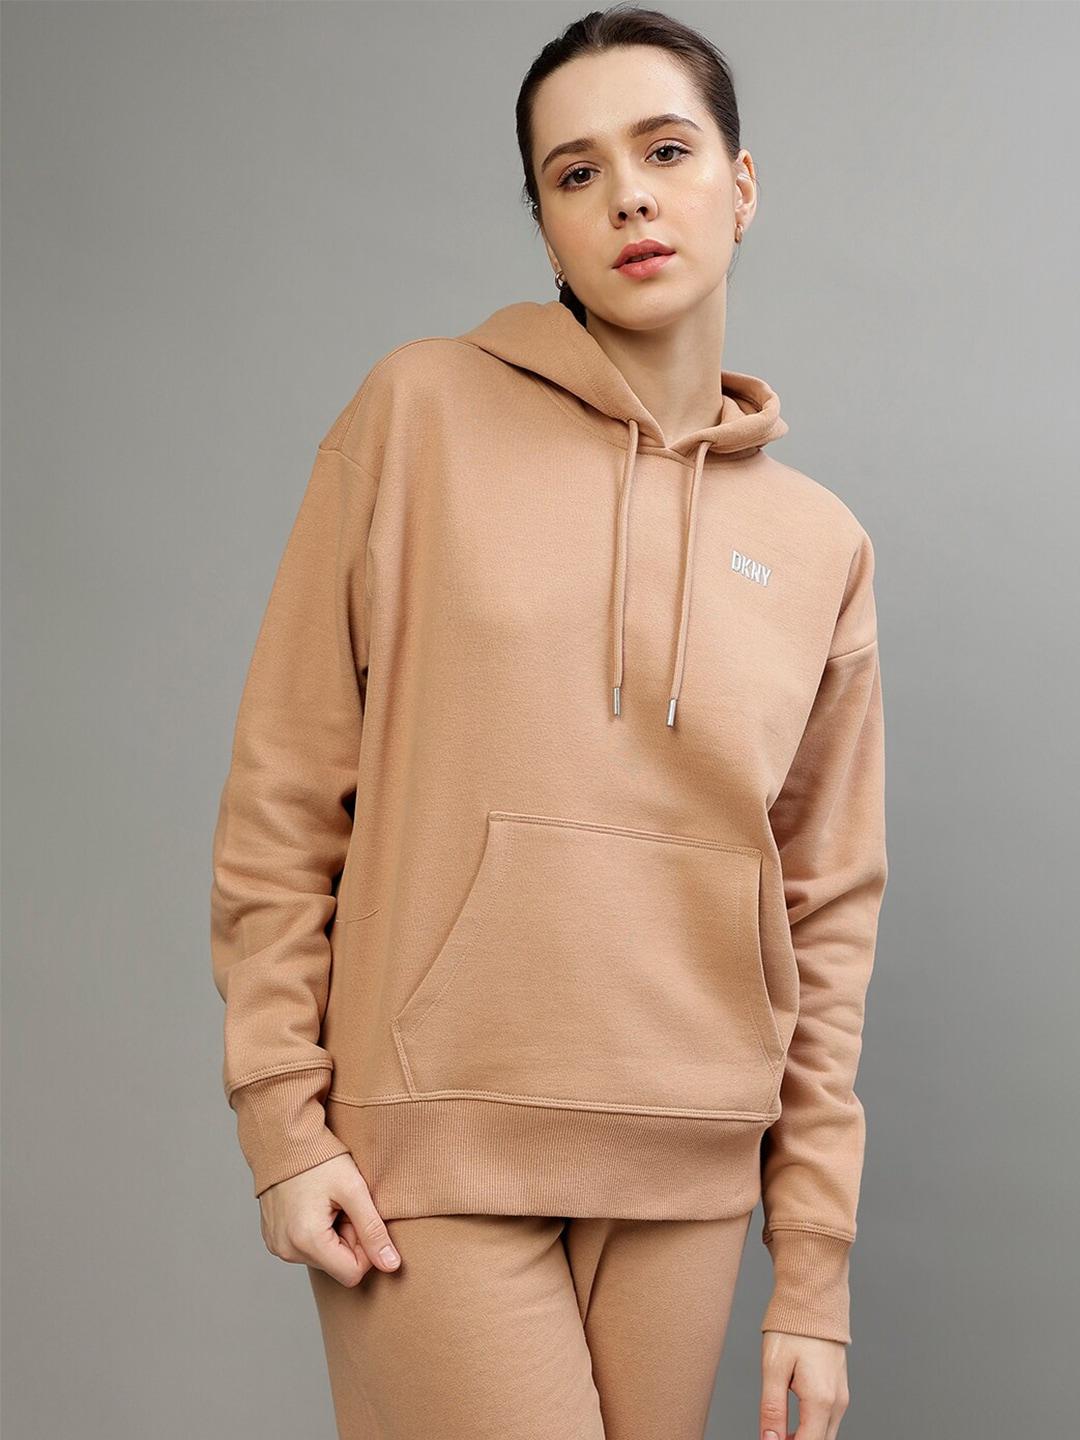 dkny-long-sleeves-hooded-pullover